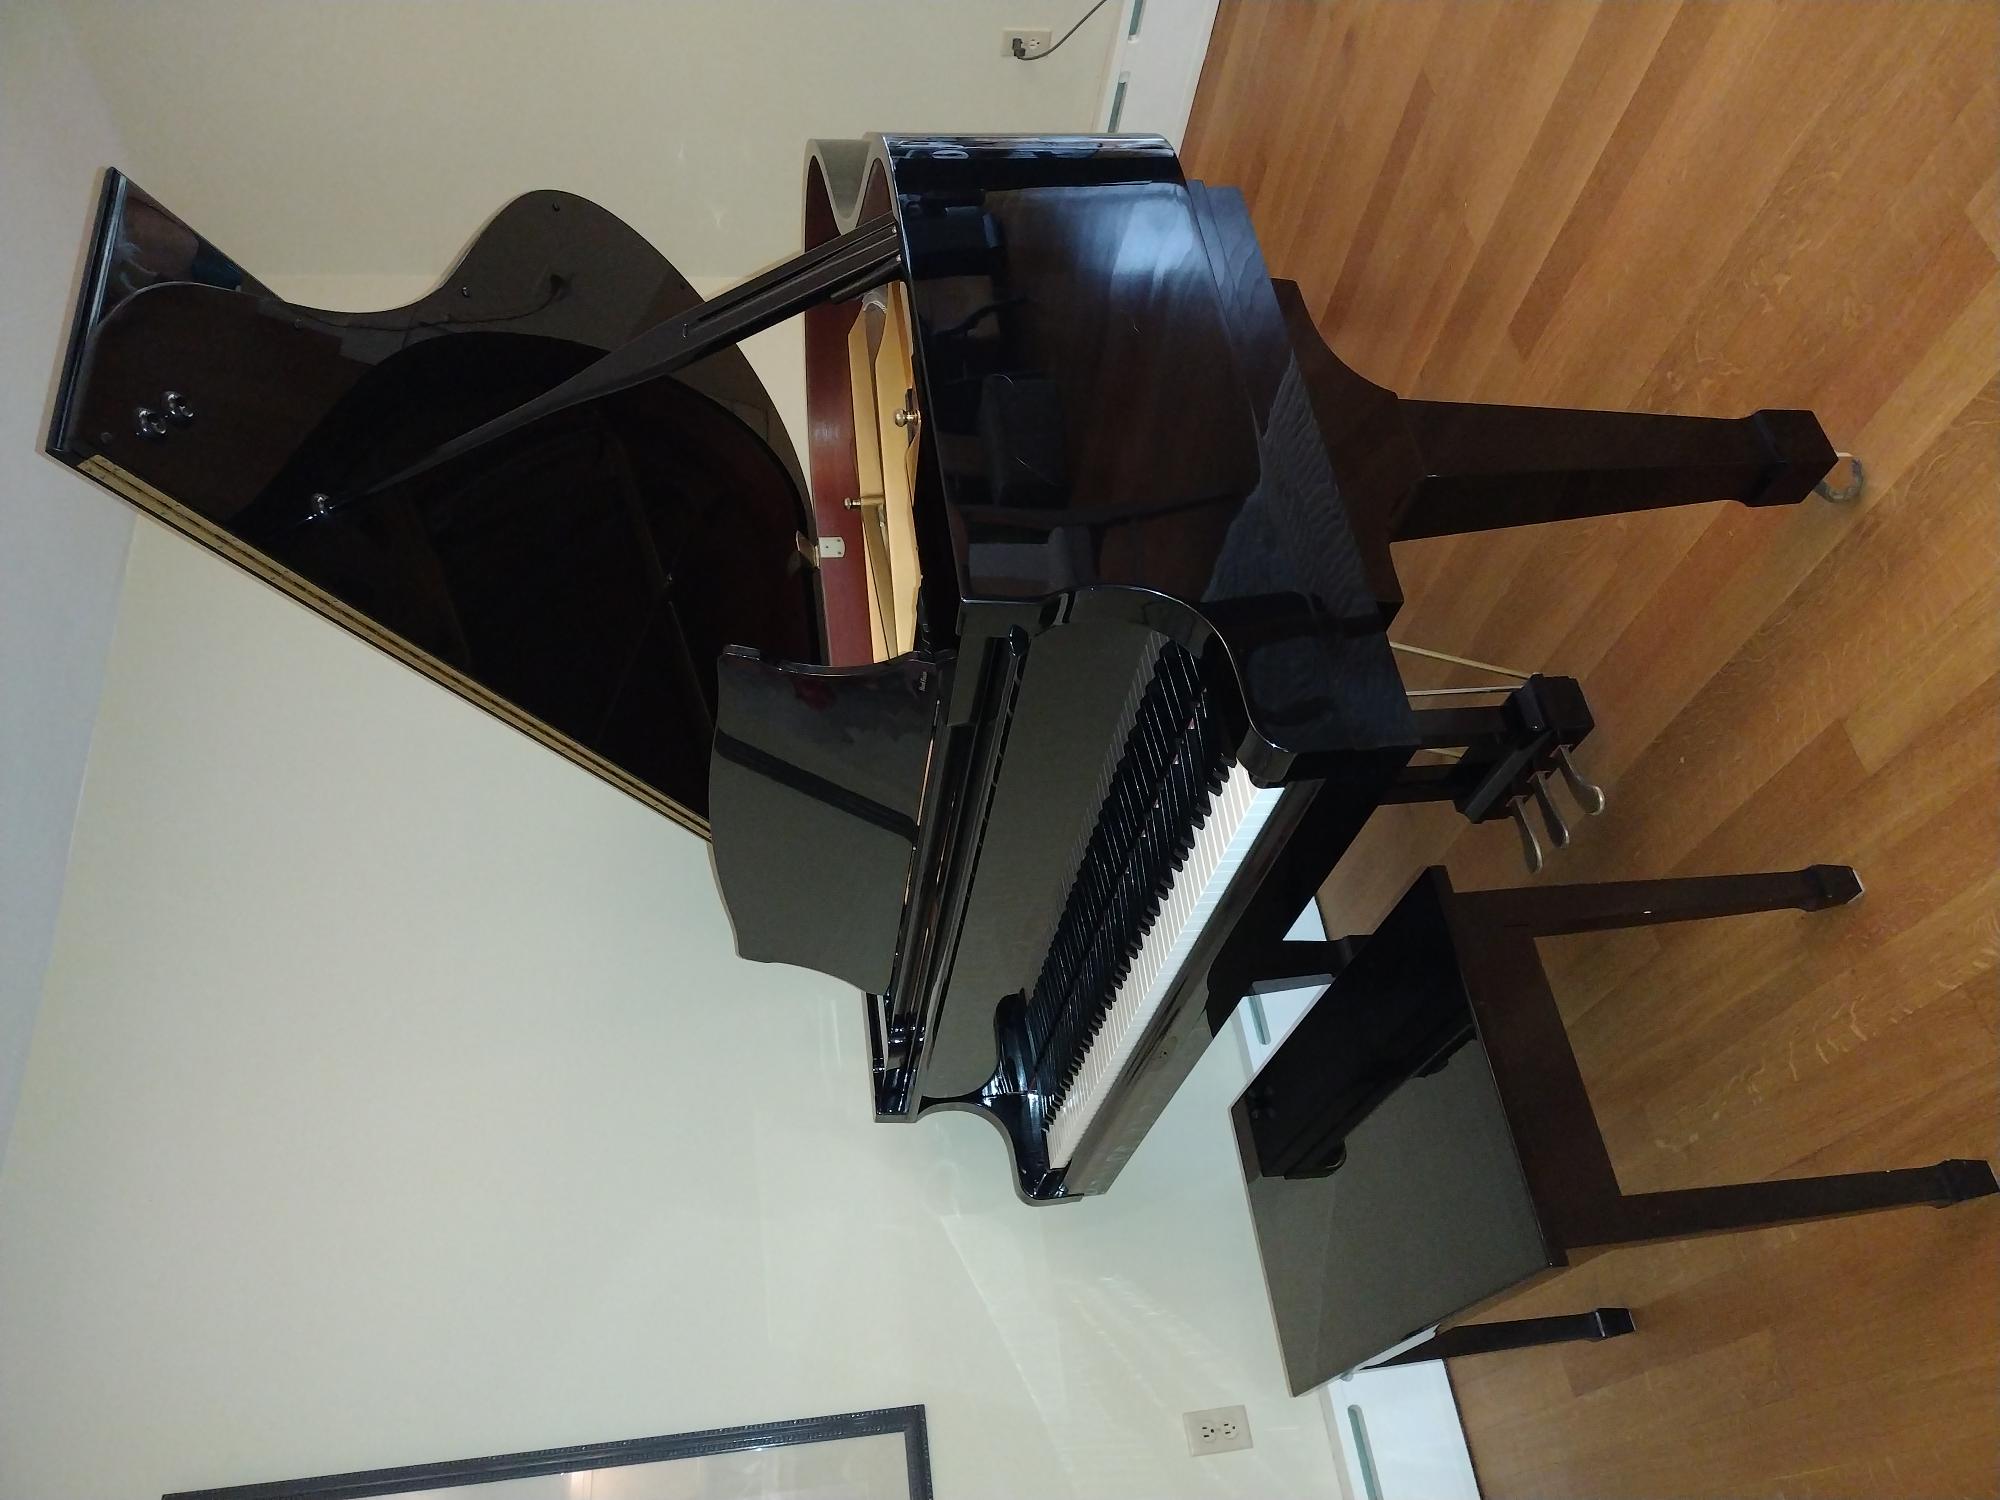 Used Kawai RX-2 in excellent condition